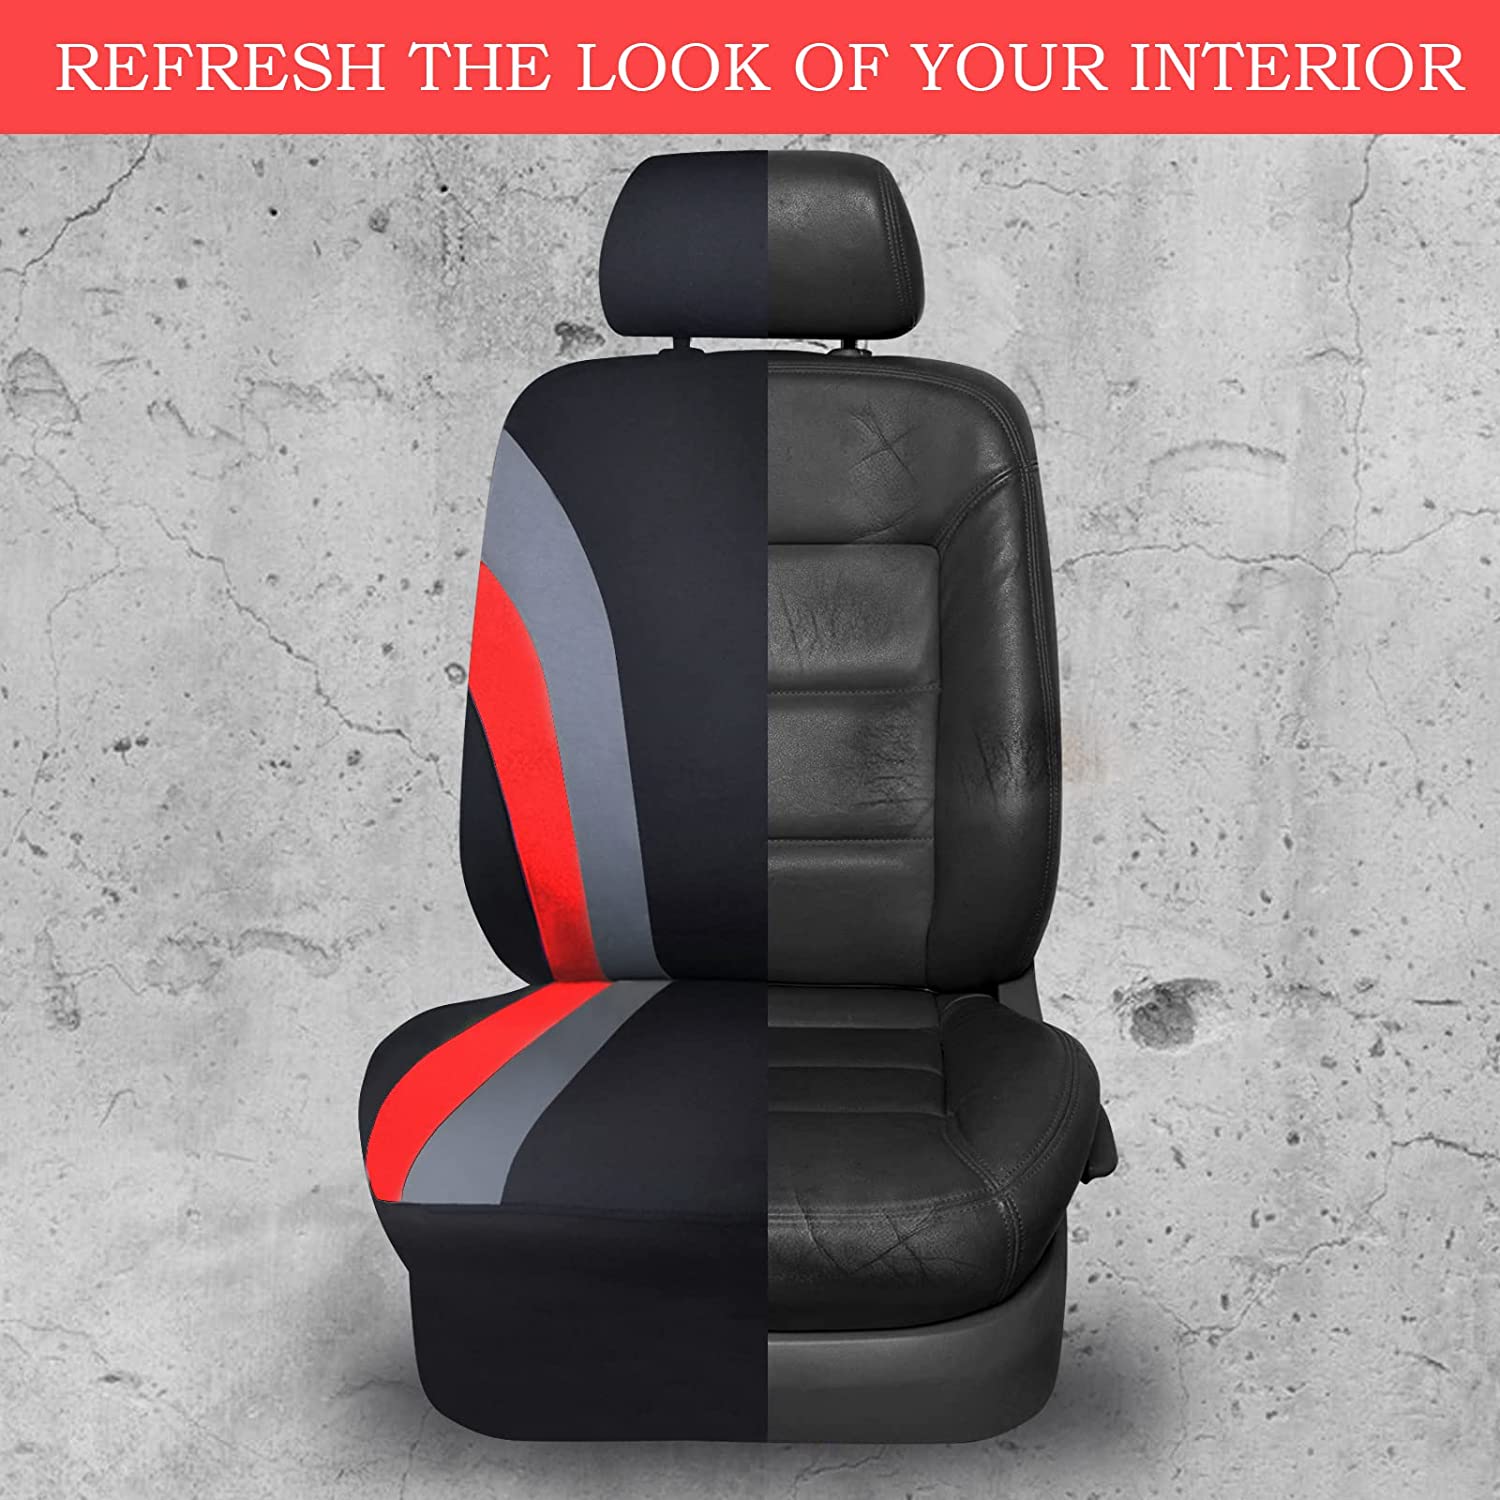 9PCS Universal Fit Car Seat Cover -100% Breathable with 5mm Composite  Sponge Inside,Airbag Compatible,3zipper Bench(Full Set, Black and Red) 